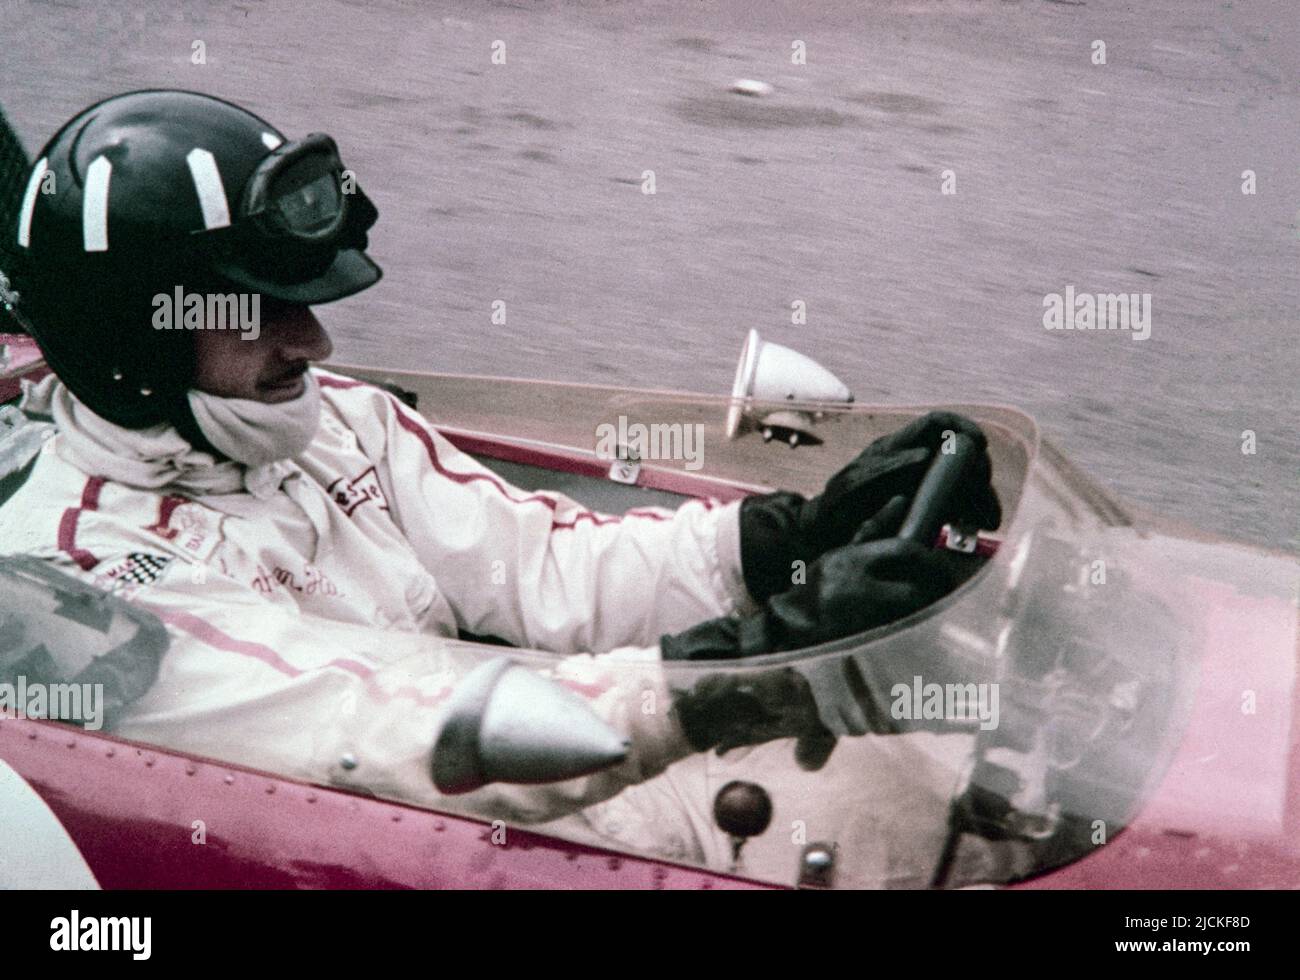 1968 British Formula 1 Grand Prix at Brands Hatch. Graham Hill in the cockpit of the Lotus 49B of the Gold Leaf Team Lotus Racing Team. Stock Photo